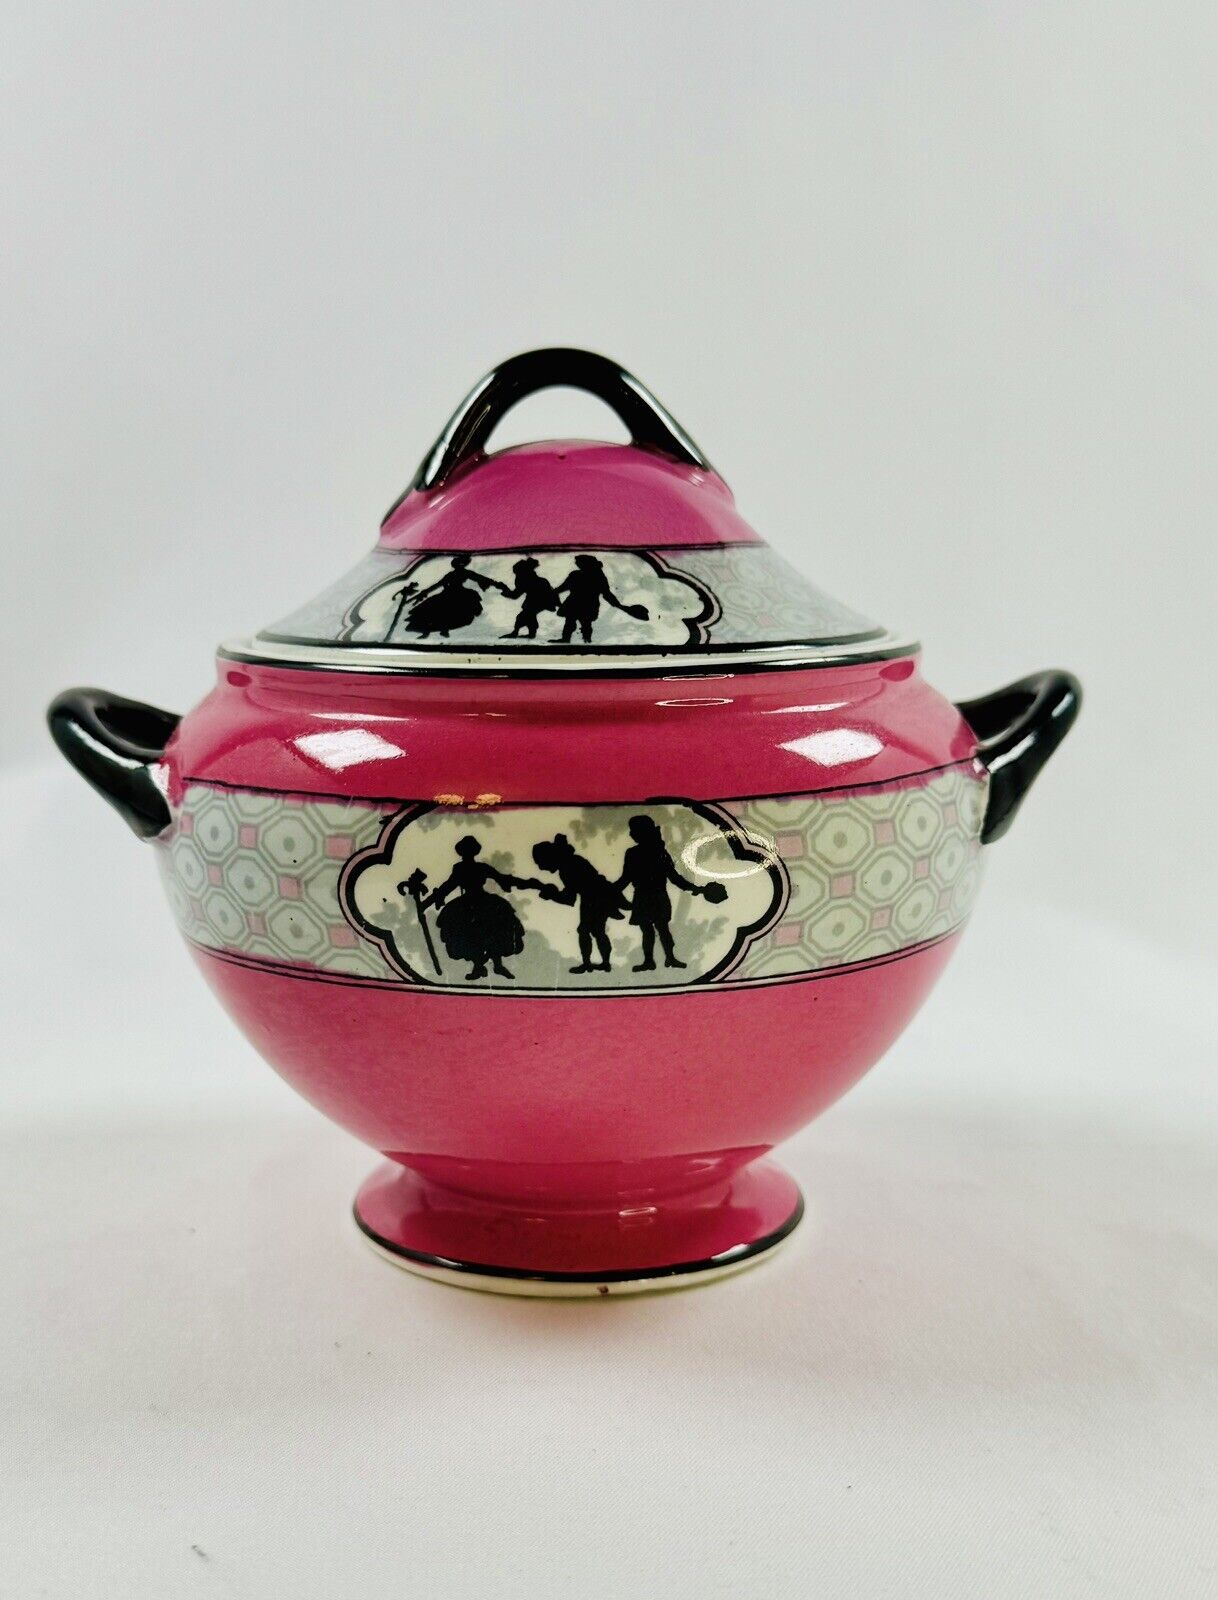 Baker & Co. Ltd. England Silhouette Sugar Bowl Hot Pink Early-Mid 1900s Antique.